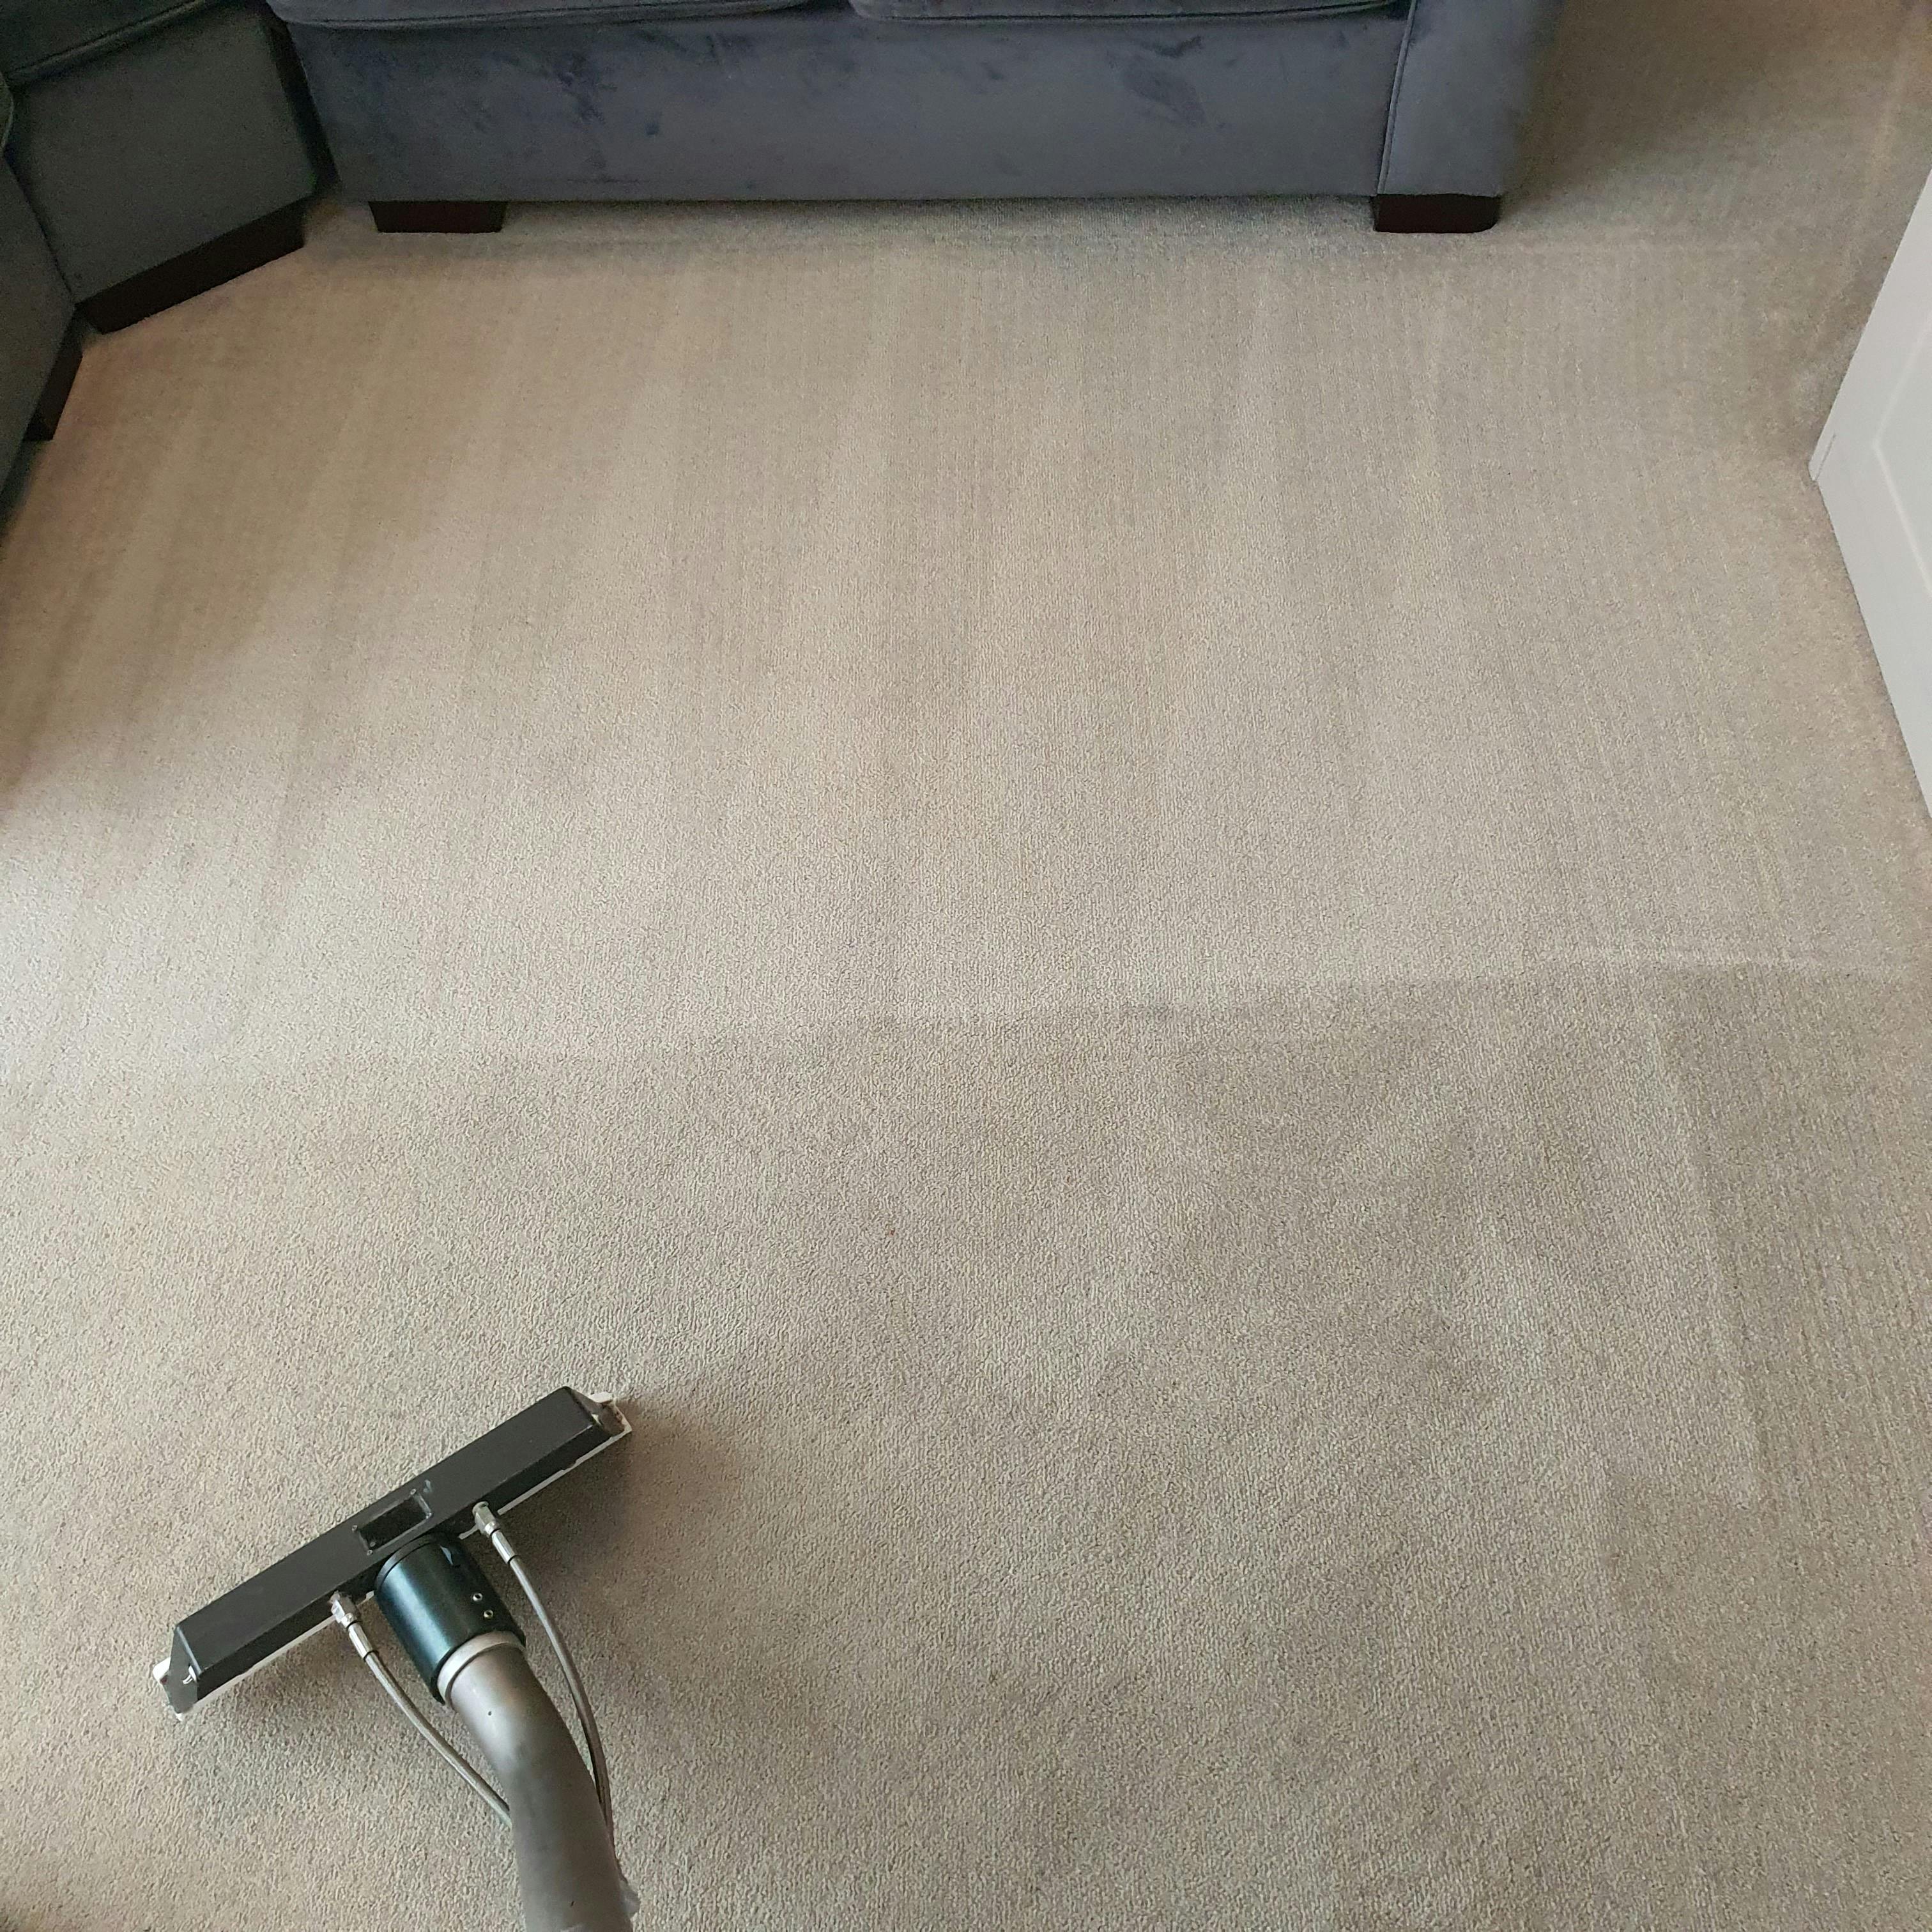 Carpet cleaning services near me